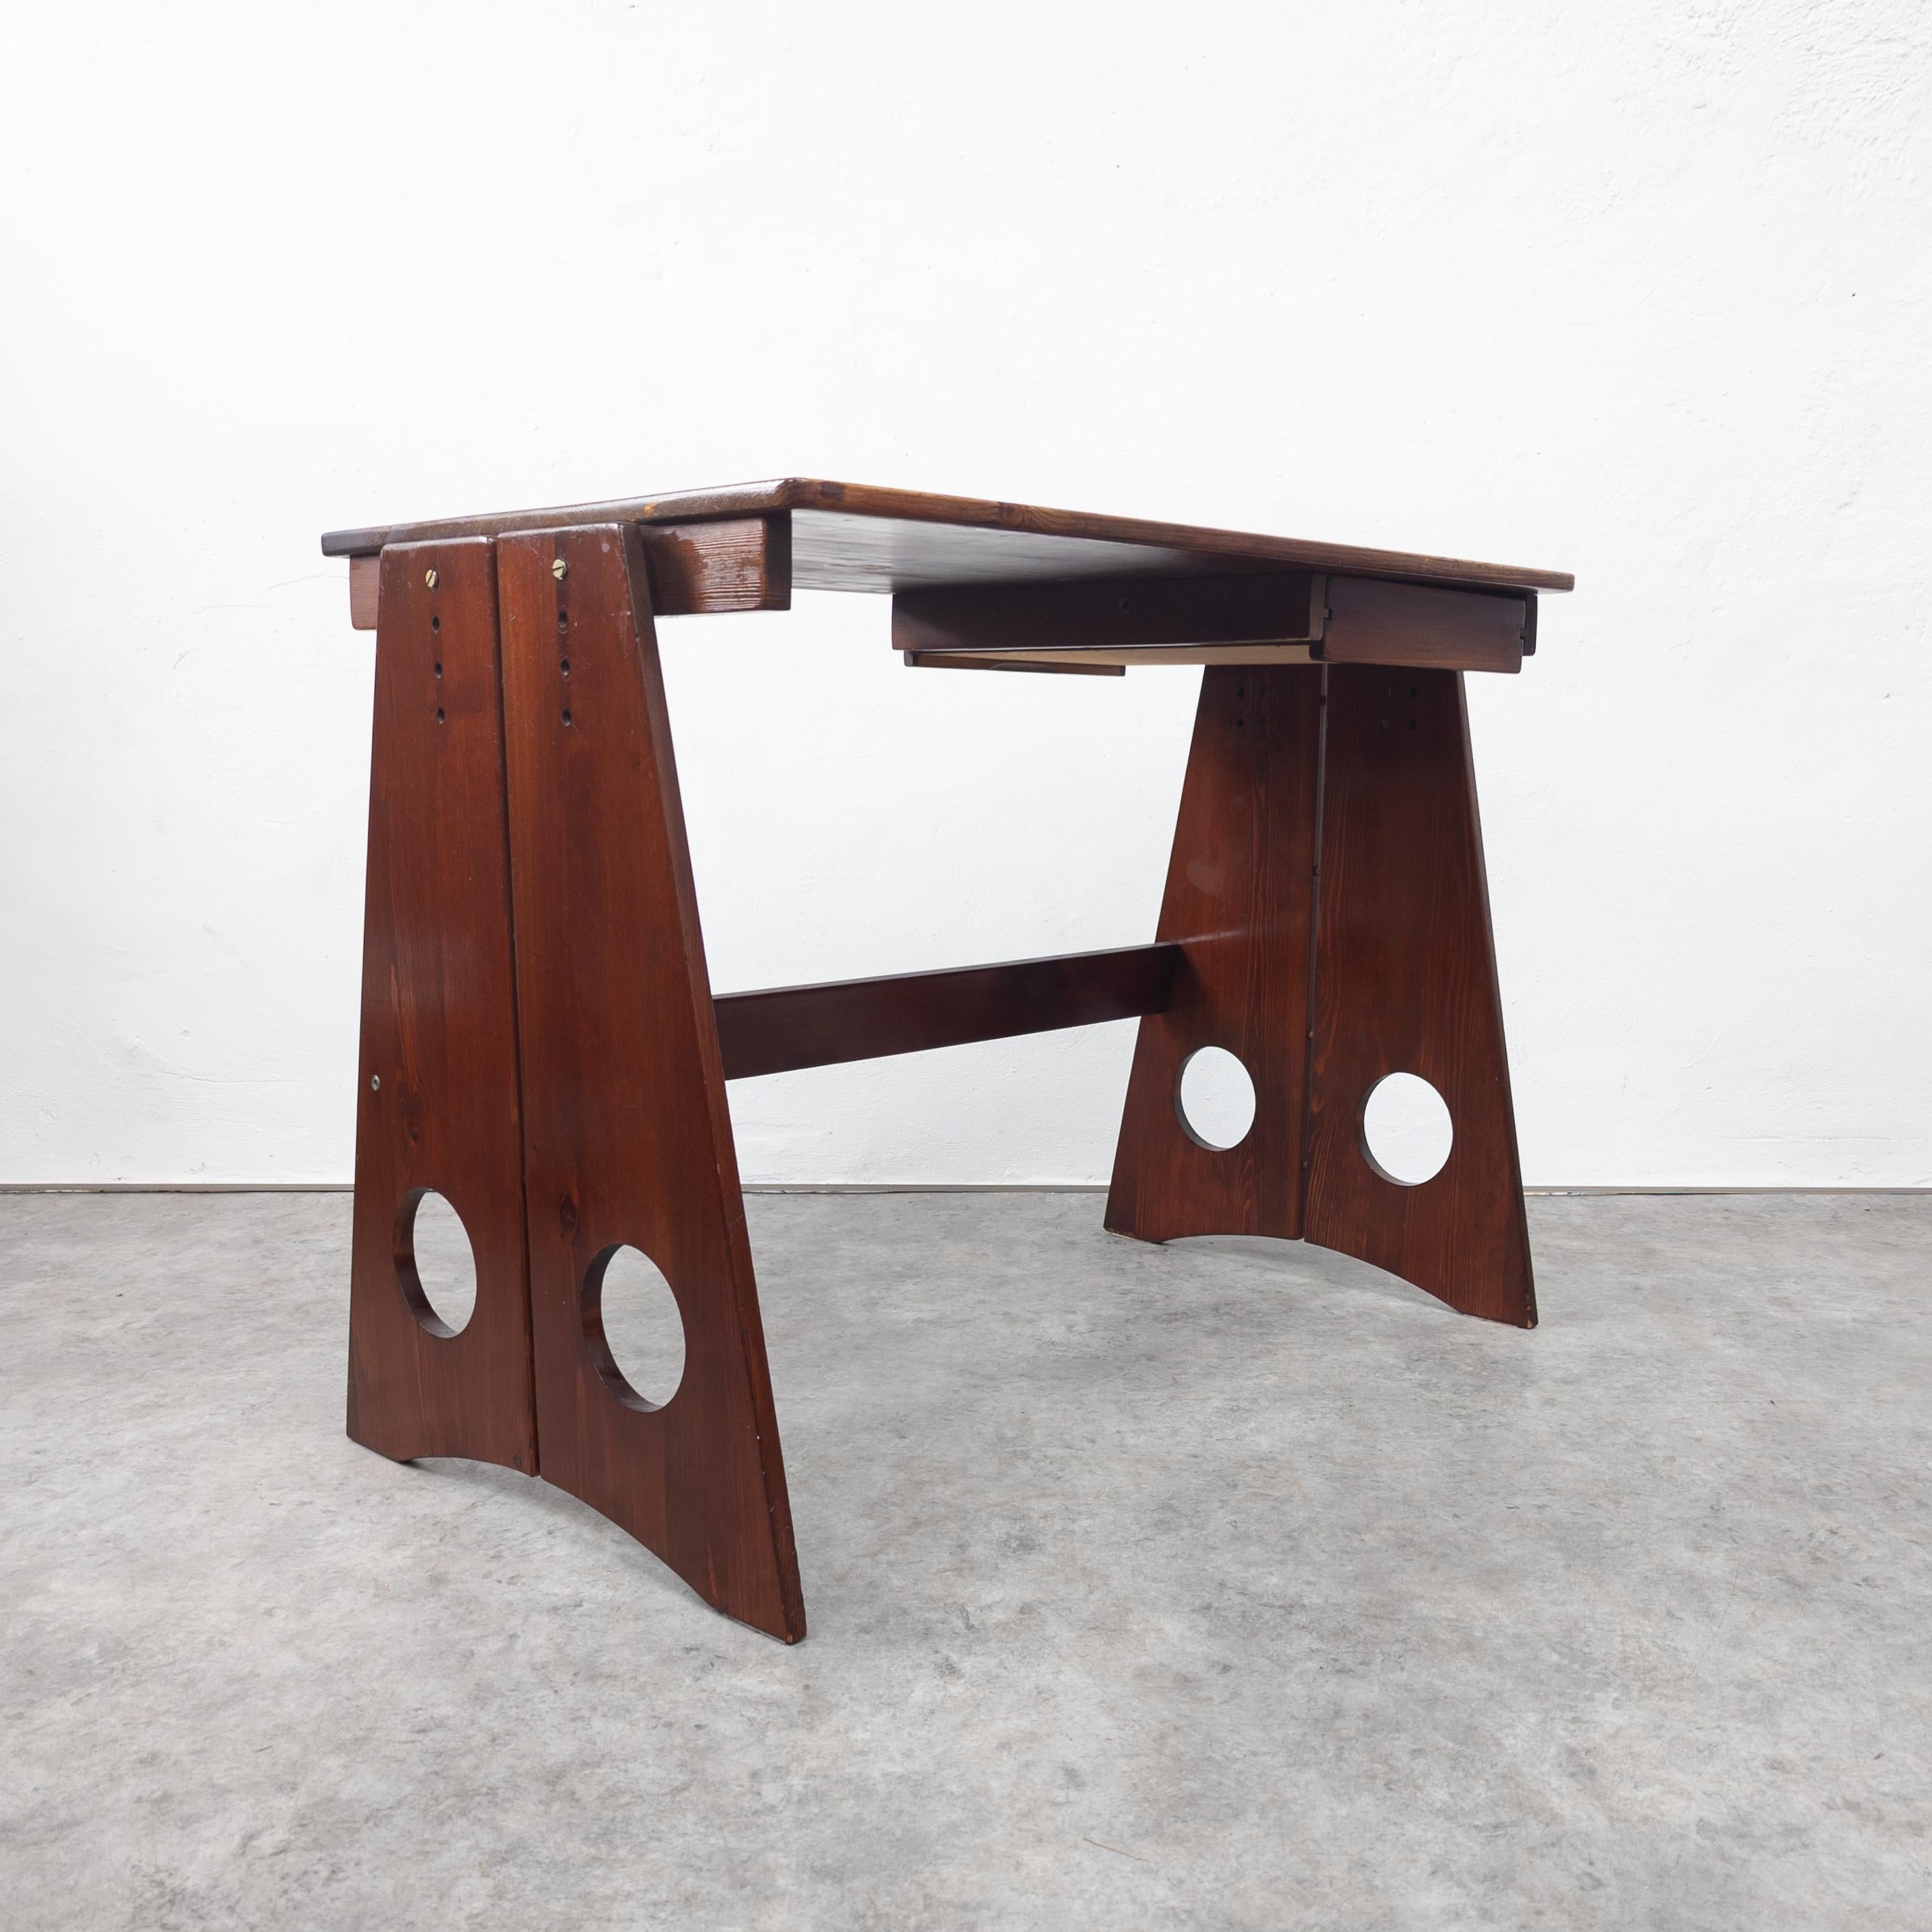 Rare pine wood desk designed by Gilbert Marklund. Manufactured by Furusnickarn AB, Sweden 1970s. Known for its iconic legs with circular perforations. Features a drawer underneath the table top, which can be accessed from both sides. Adjustable